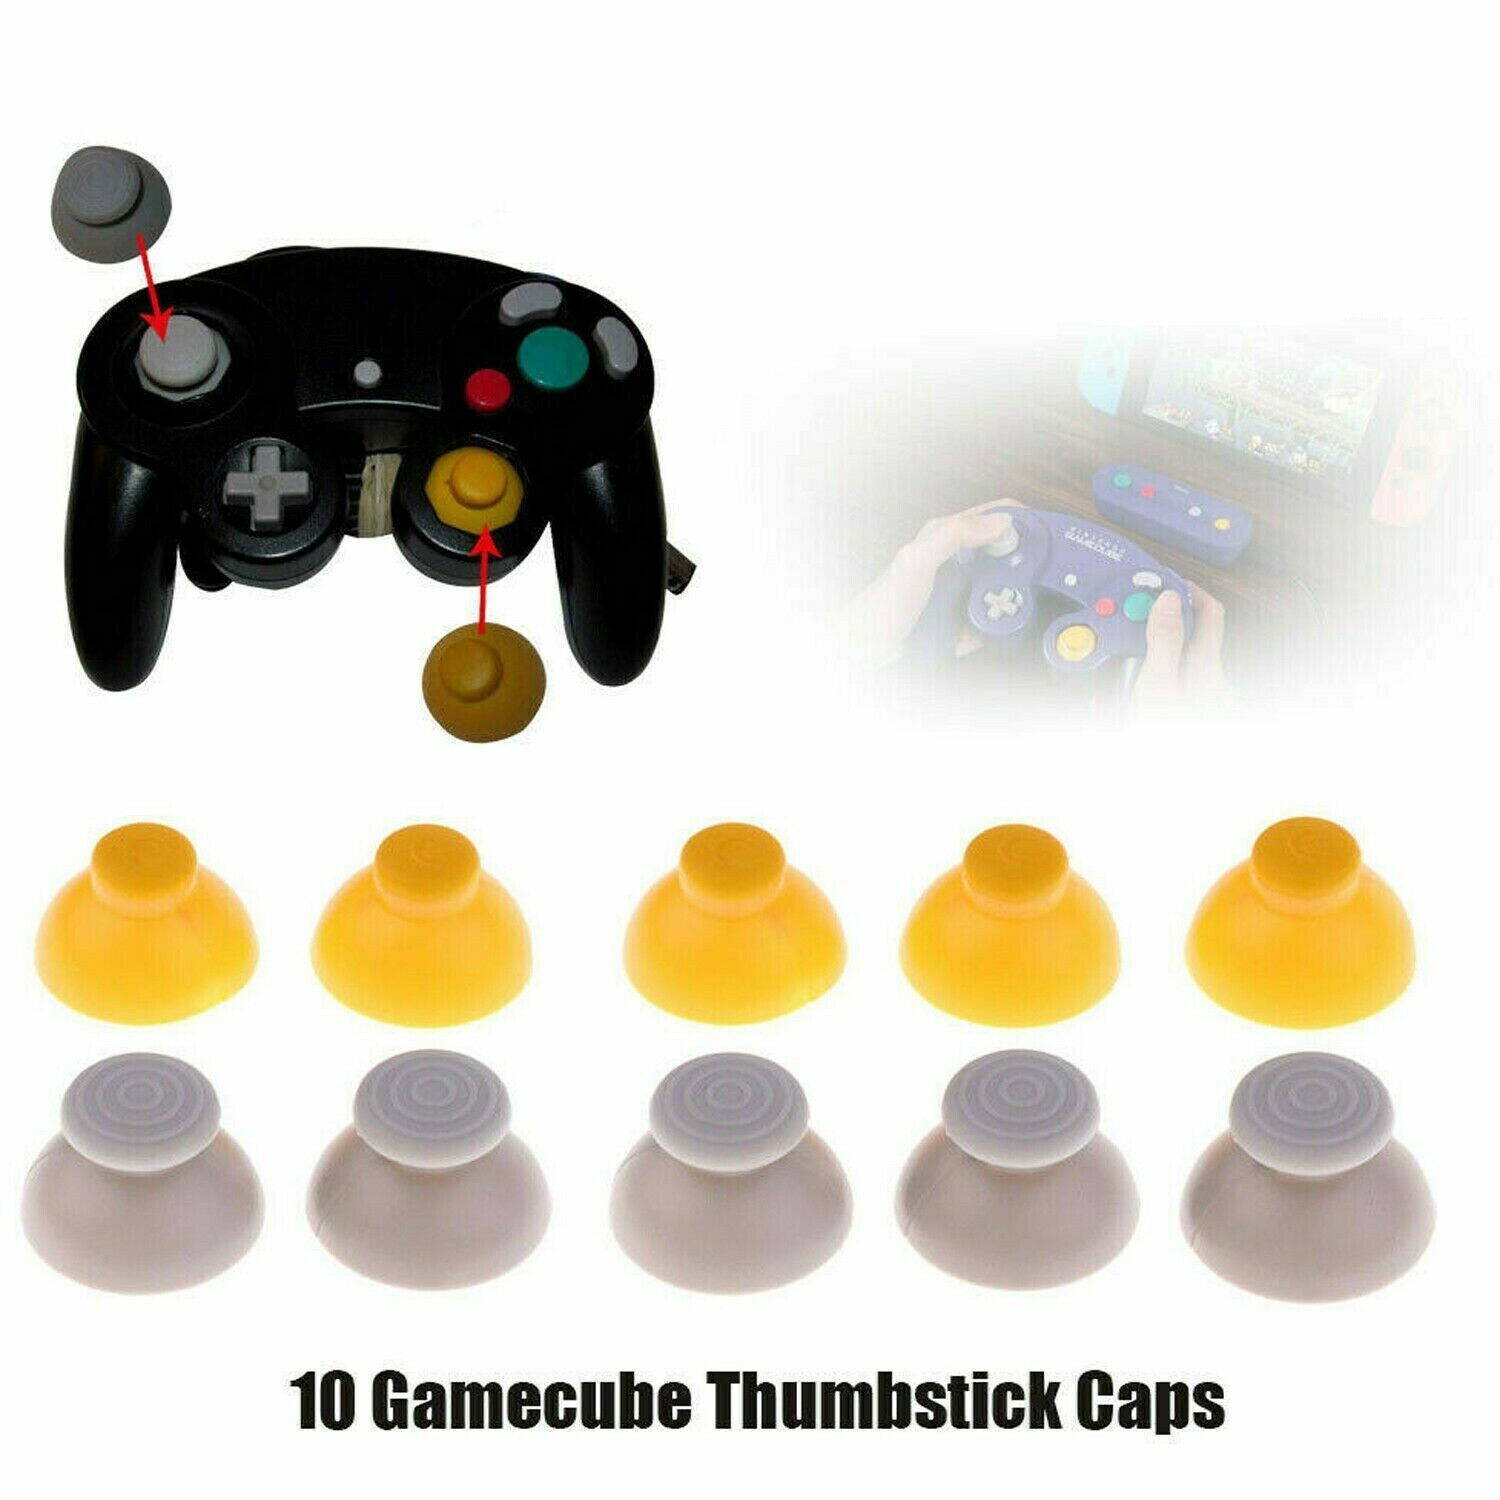 10 Replacement Thumbstick Caps Controller Joystick 5 Sets for Gamecube Unbranded Does not apply